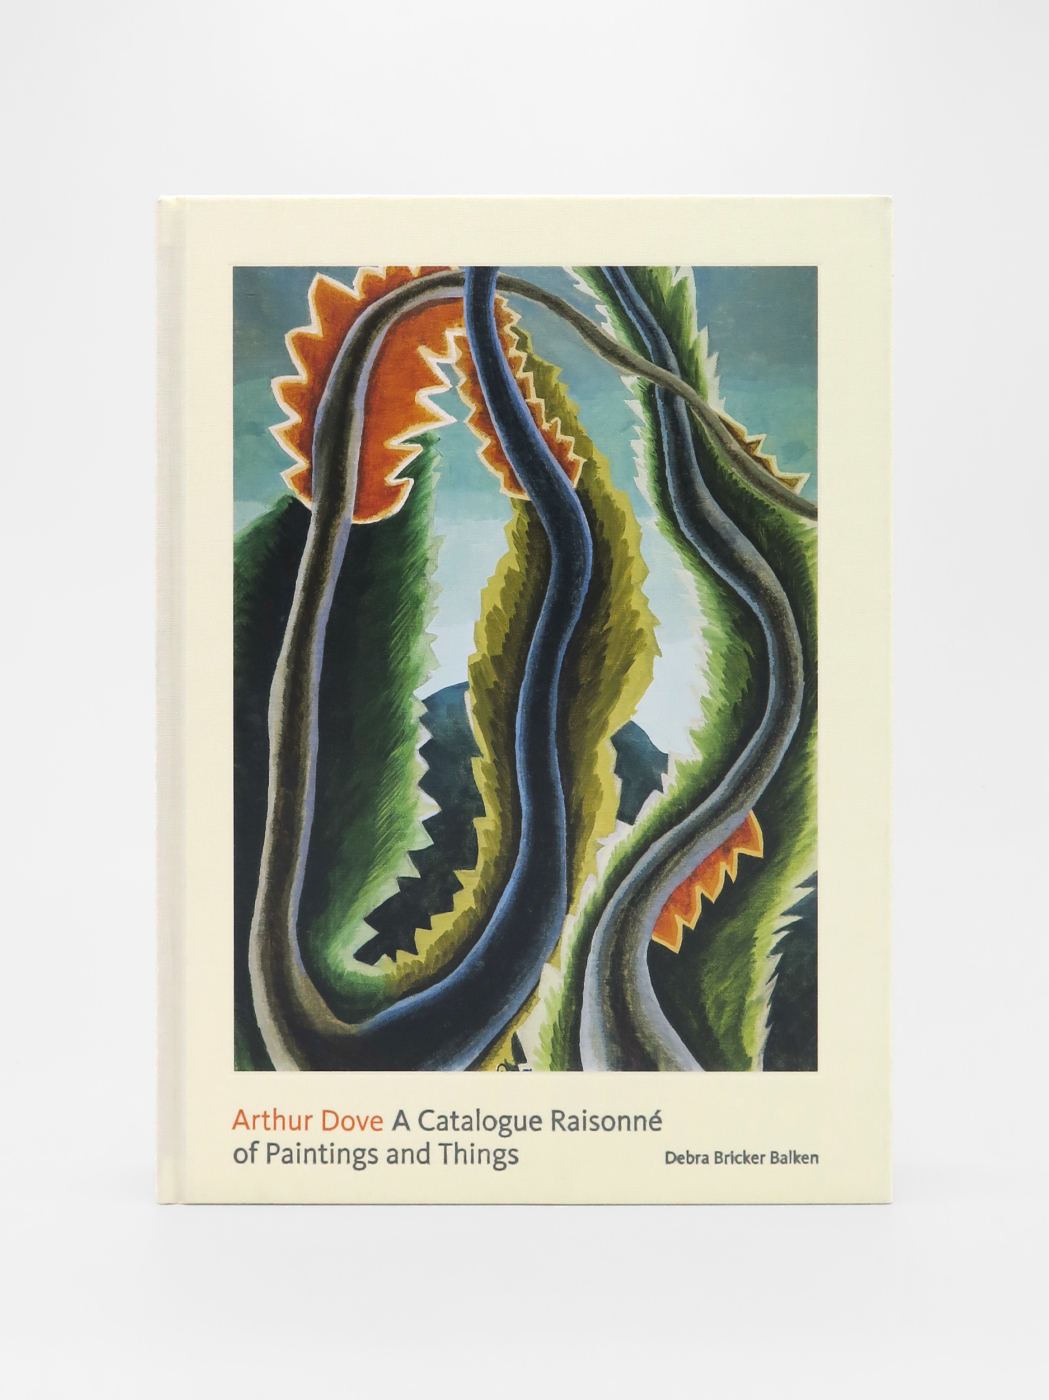 Arthur Dove, A Catalogue Raisonne of Paintings and Things